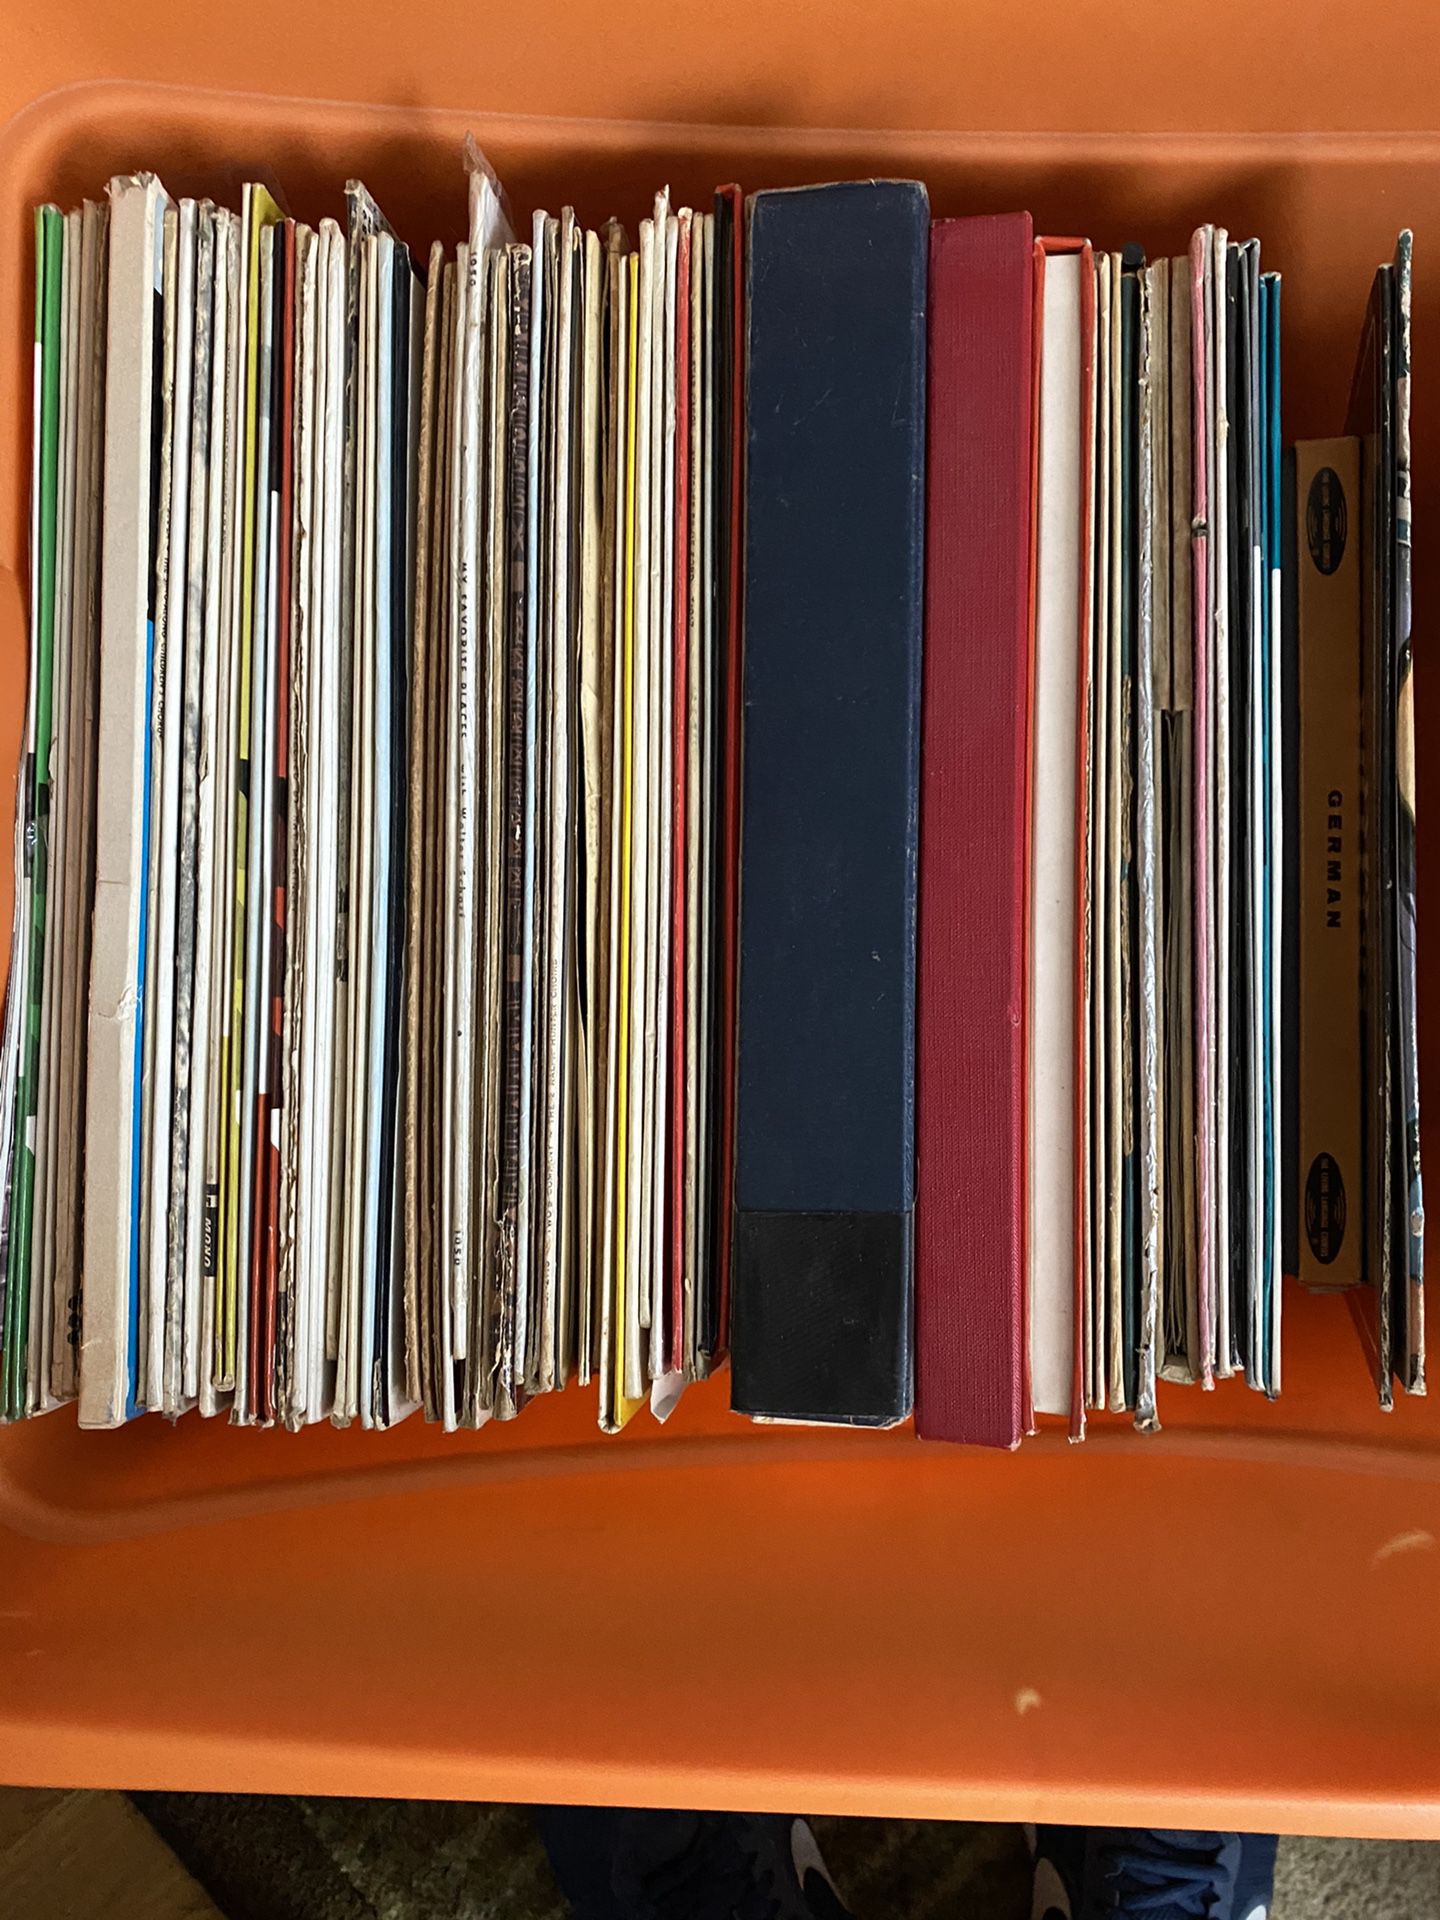 A Giant Tub of Vinyl Records